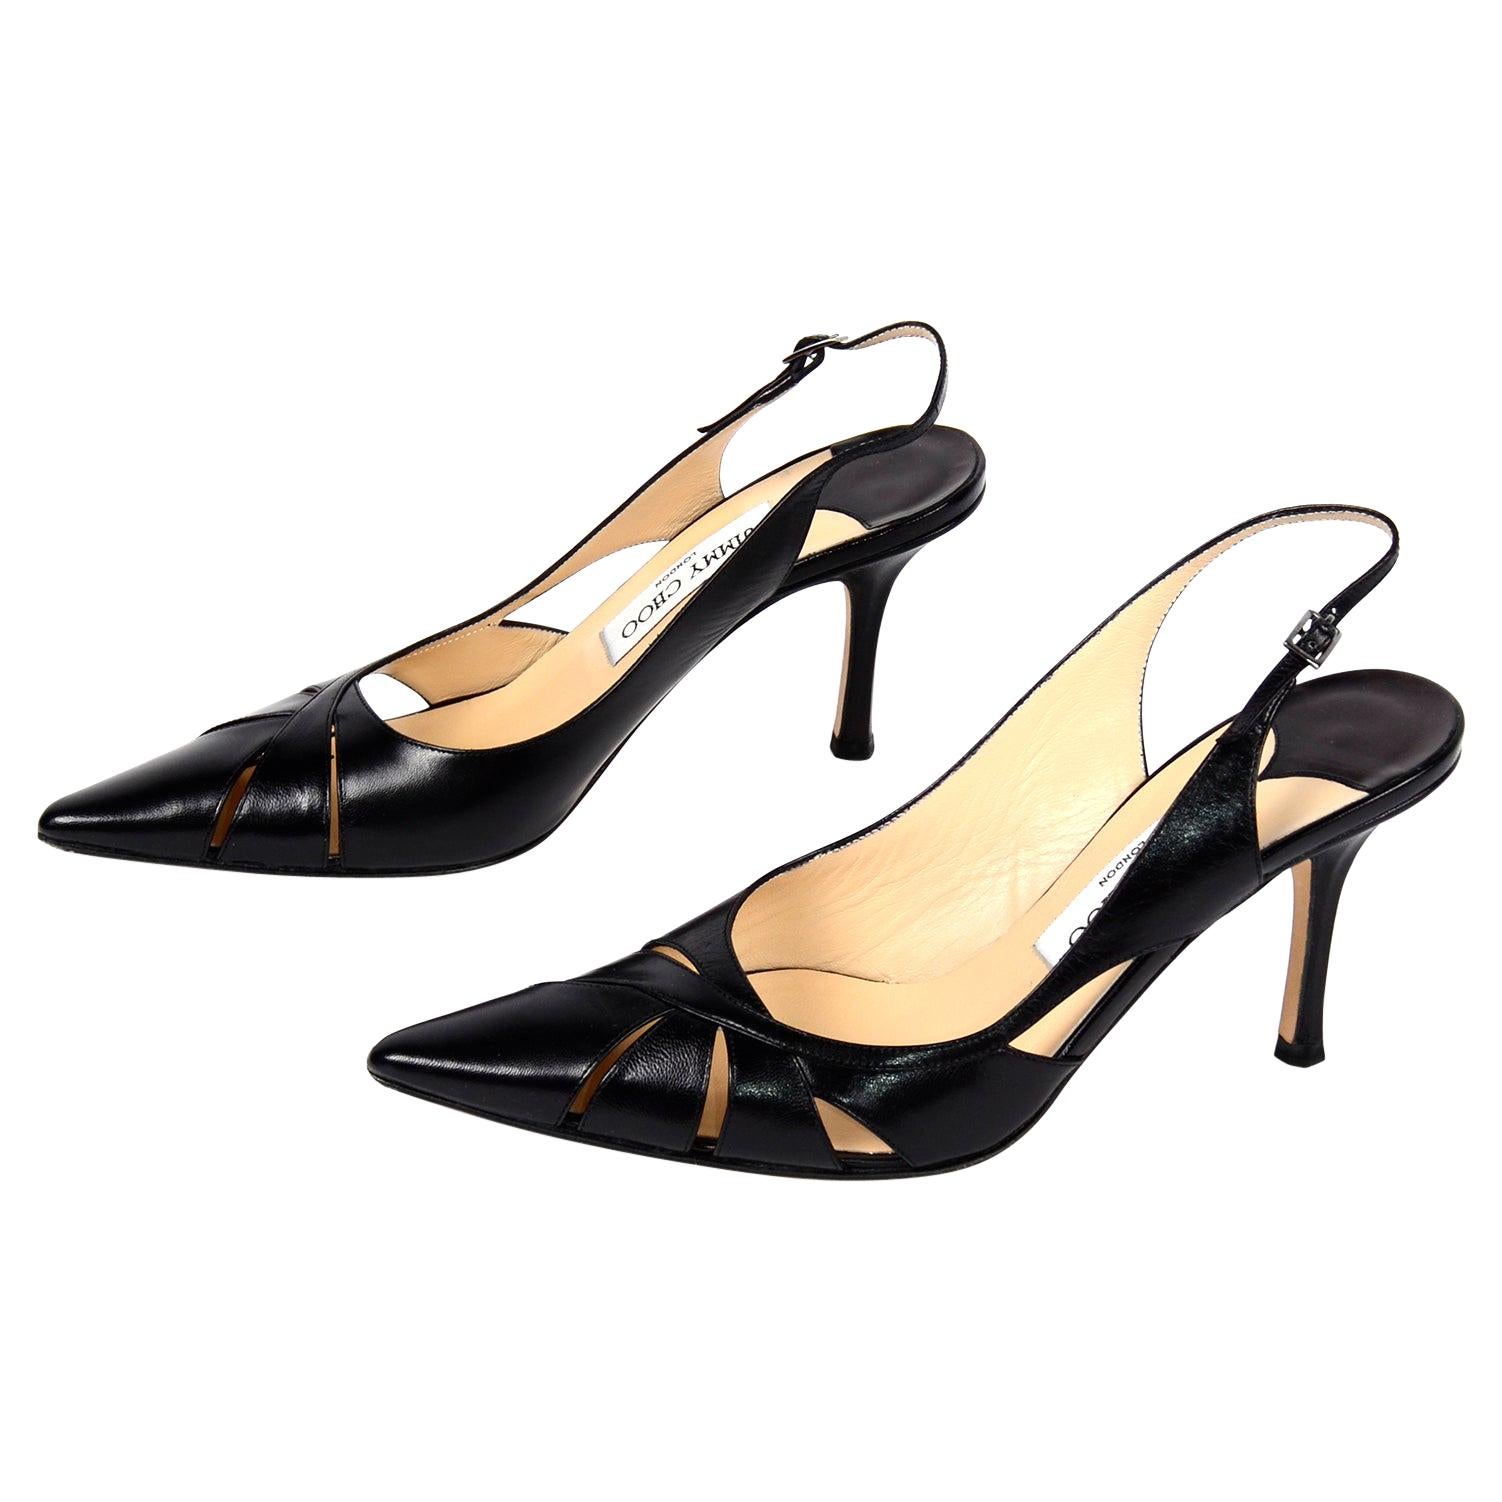 Jimmy Choo Black Cutout Slingback Pointed Toe Shoes With Original Box For Sale